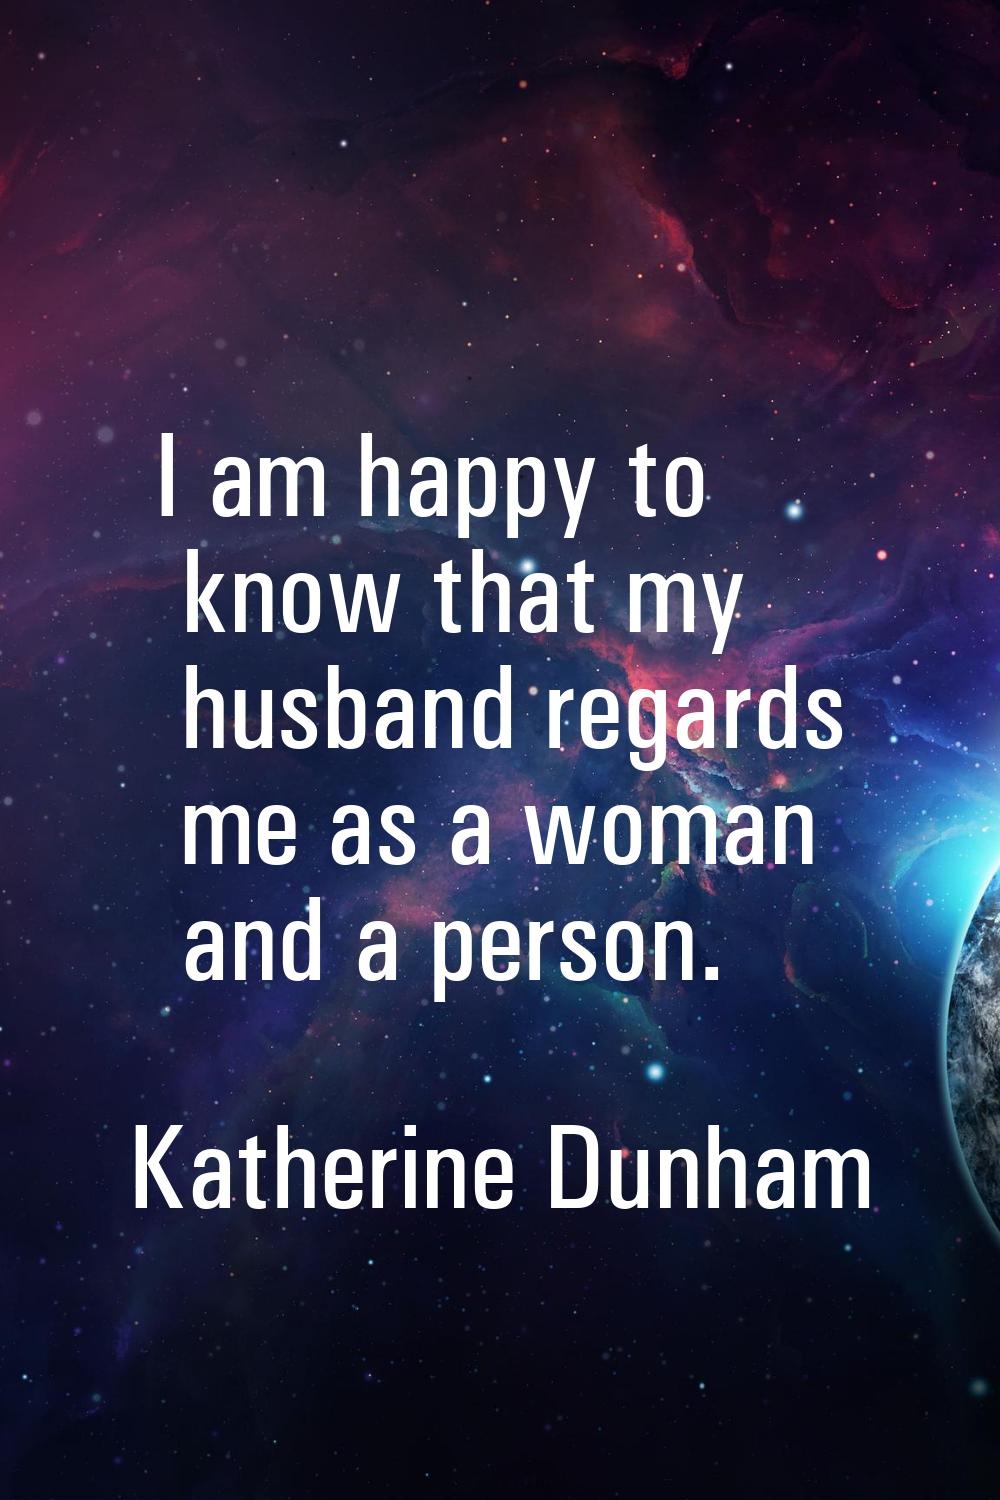 I am happy to know that my husband regards me as a woman and a person.